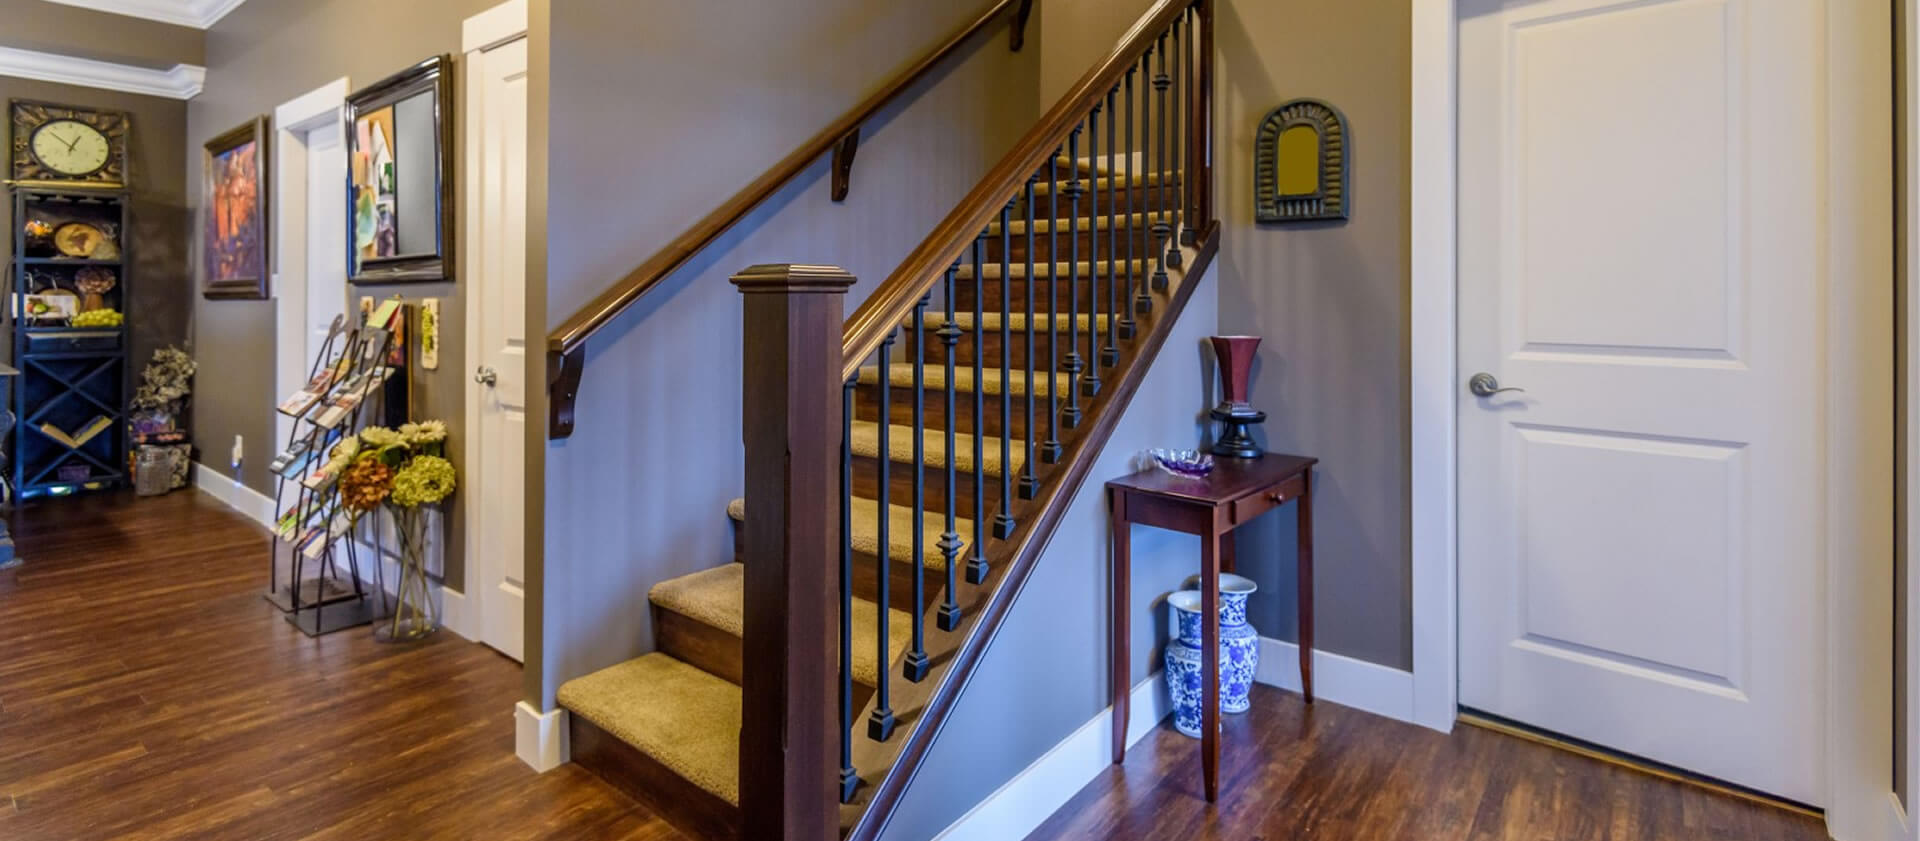 Wrought Iron Stair Balusters Dallas Wrought Iron Stair